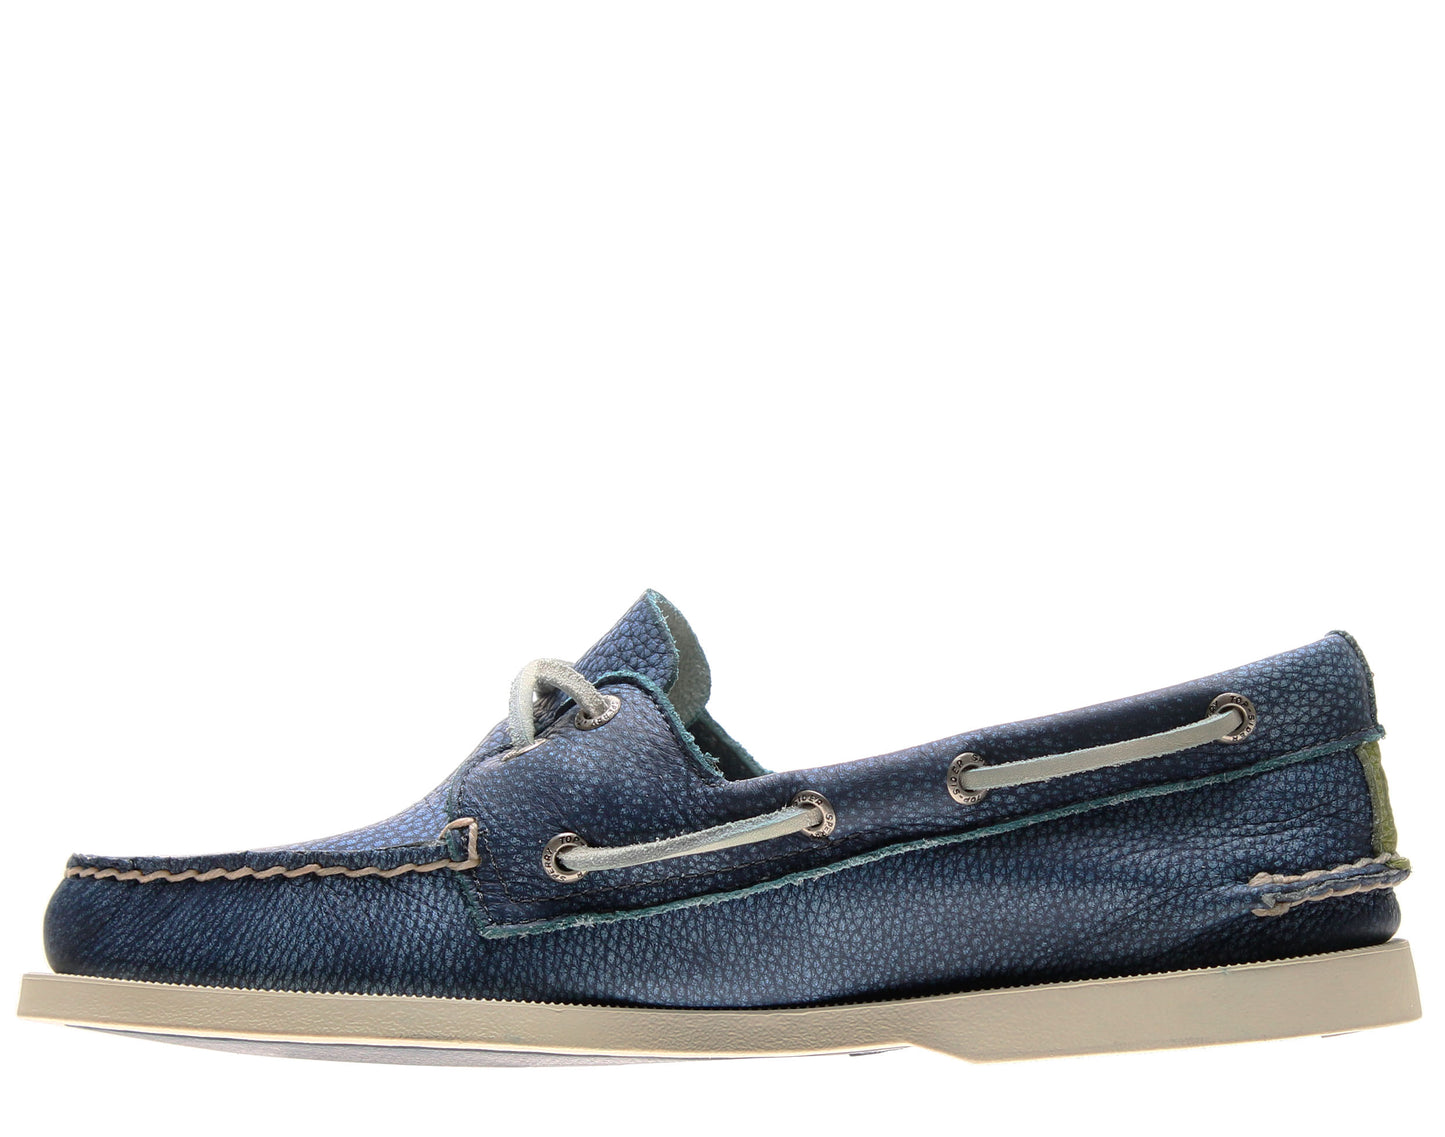 Sperry Top Sider Authentic Original Washed 2-Eye Men's Boat Shoes